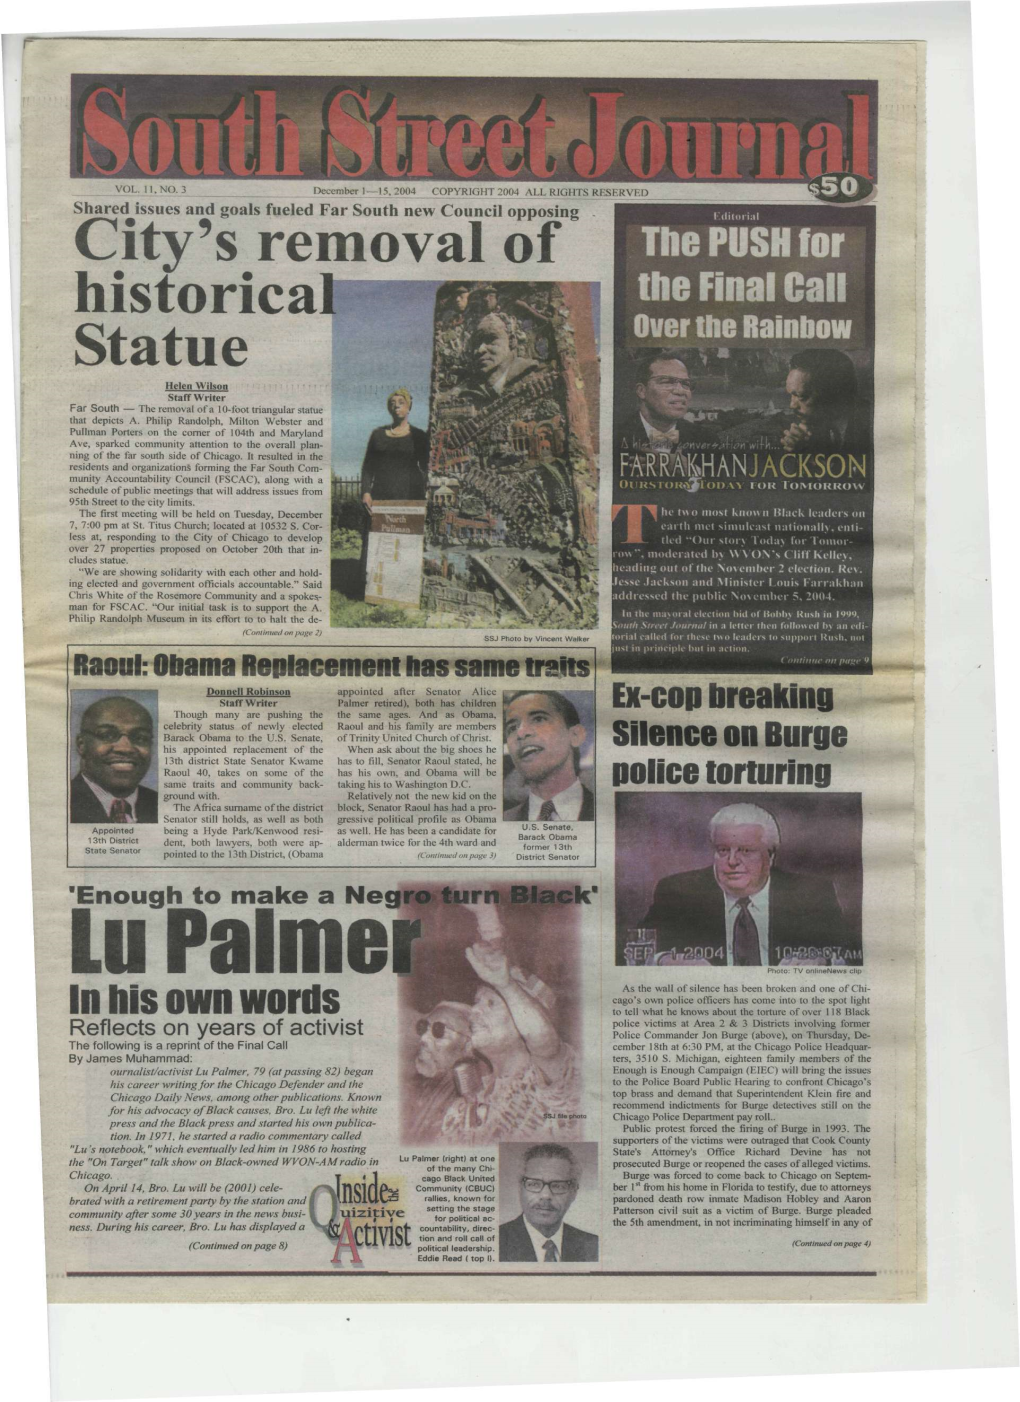 City's Removal of Historical Statue